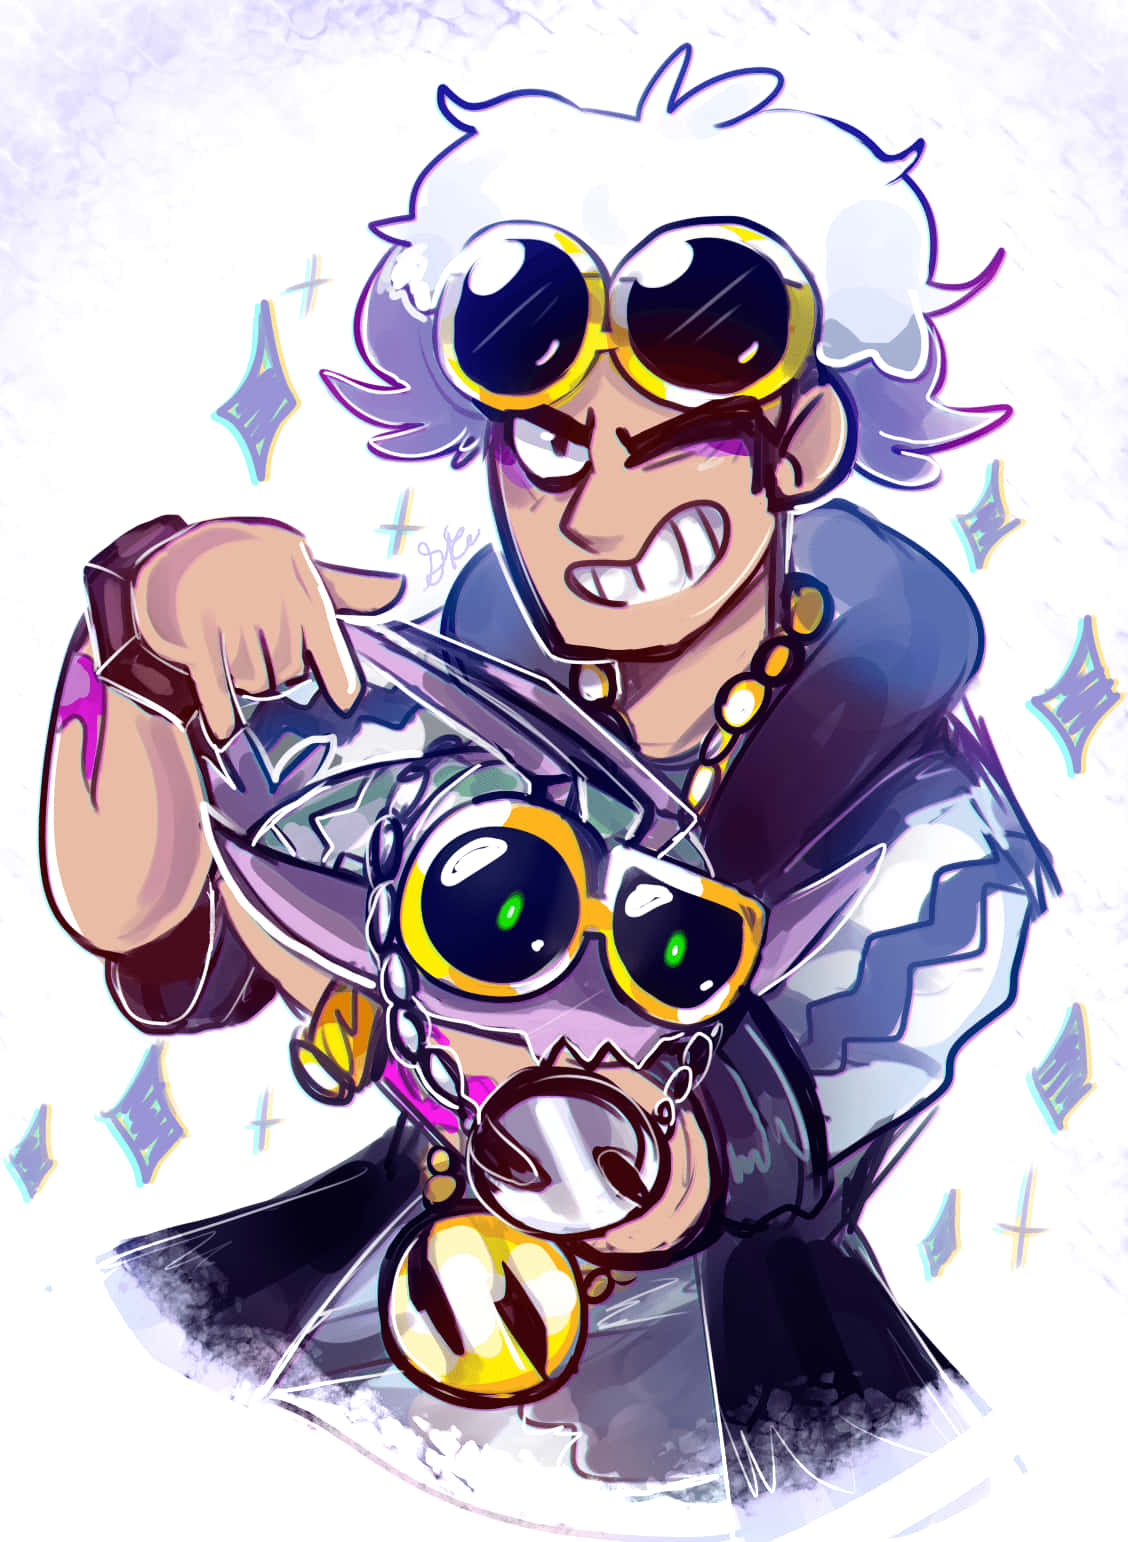 Cool Guy Guzma And Wimpod Wallpaper